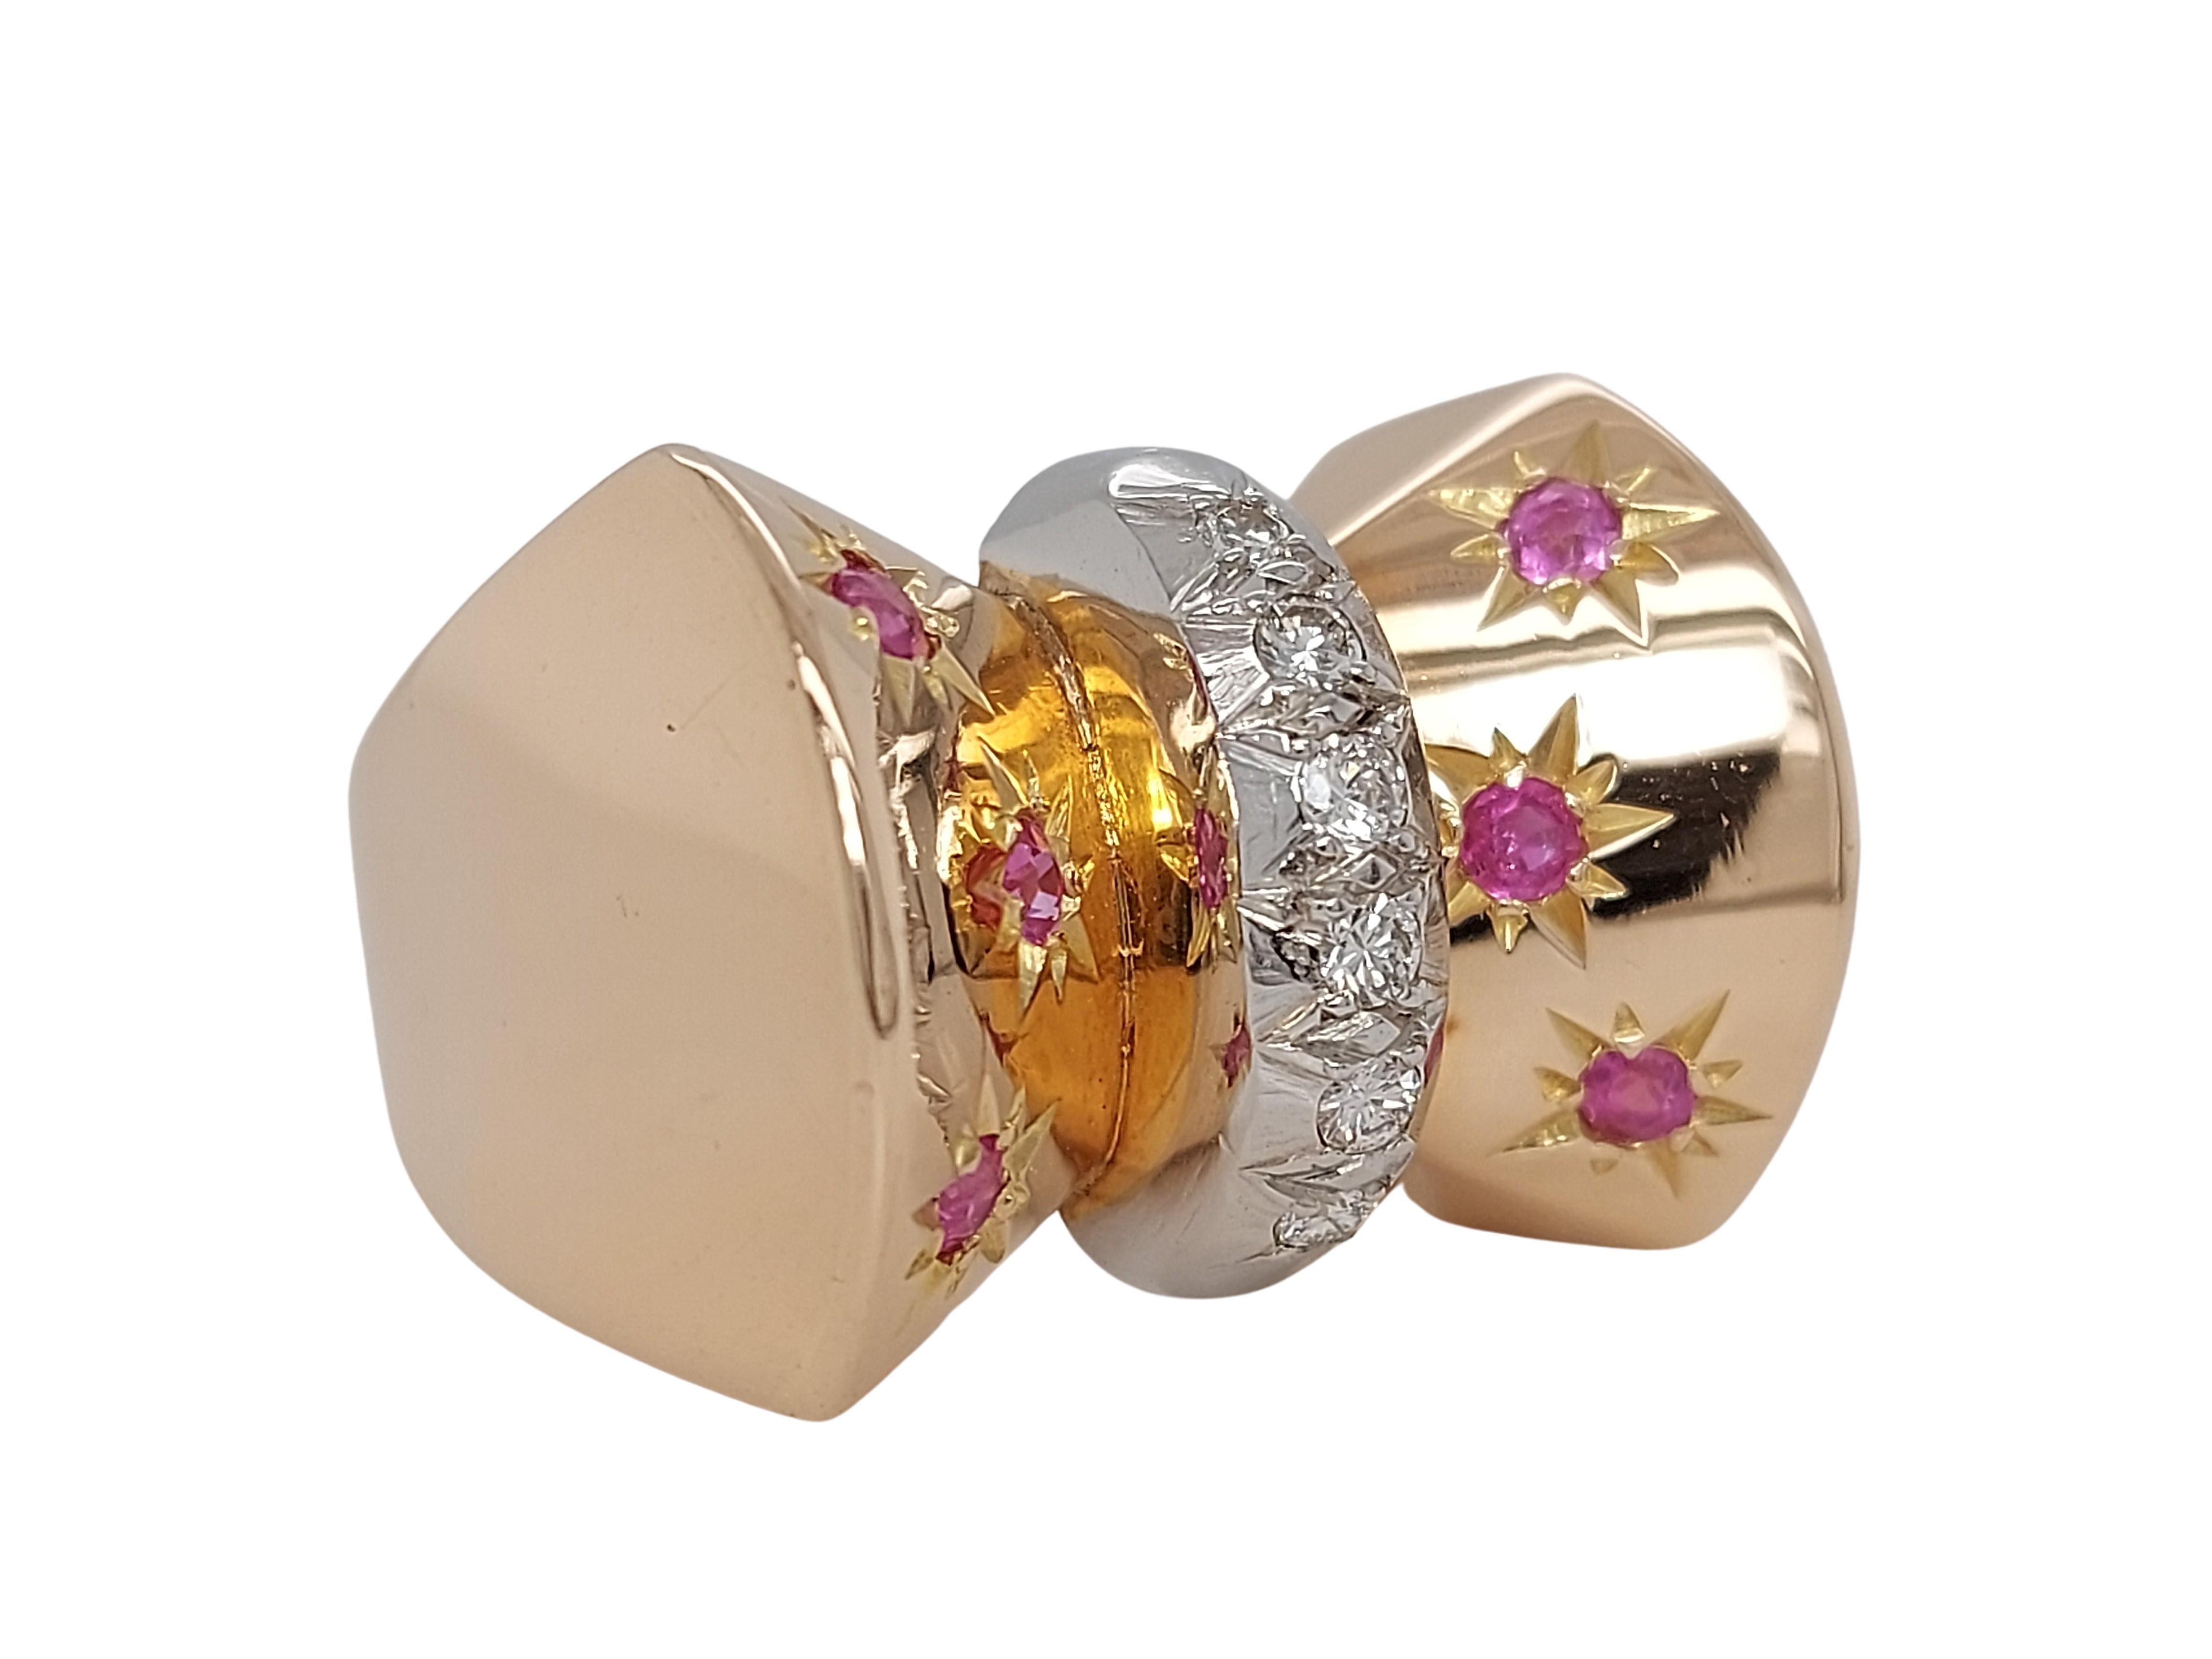 18kt Yellow Gold Ring With Diamonds And Ruby

Diamonds: 6 brilliant cut diamonds

Ruby: 6 round cut ruby 

Material: 18kt yellow & white gold

Ring size: 58.9 EU / 8.75 US (can be resized for free)

Total weight: 11.2 grams / 7.3 dwt / 0.400 oz